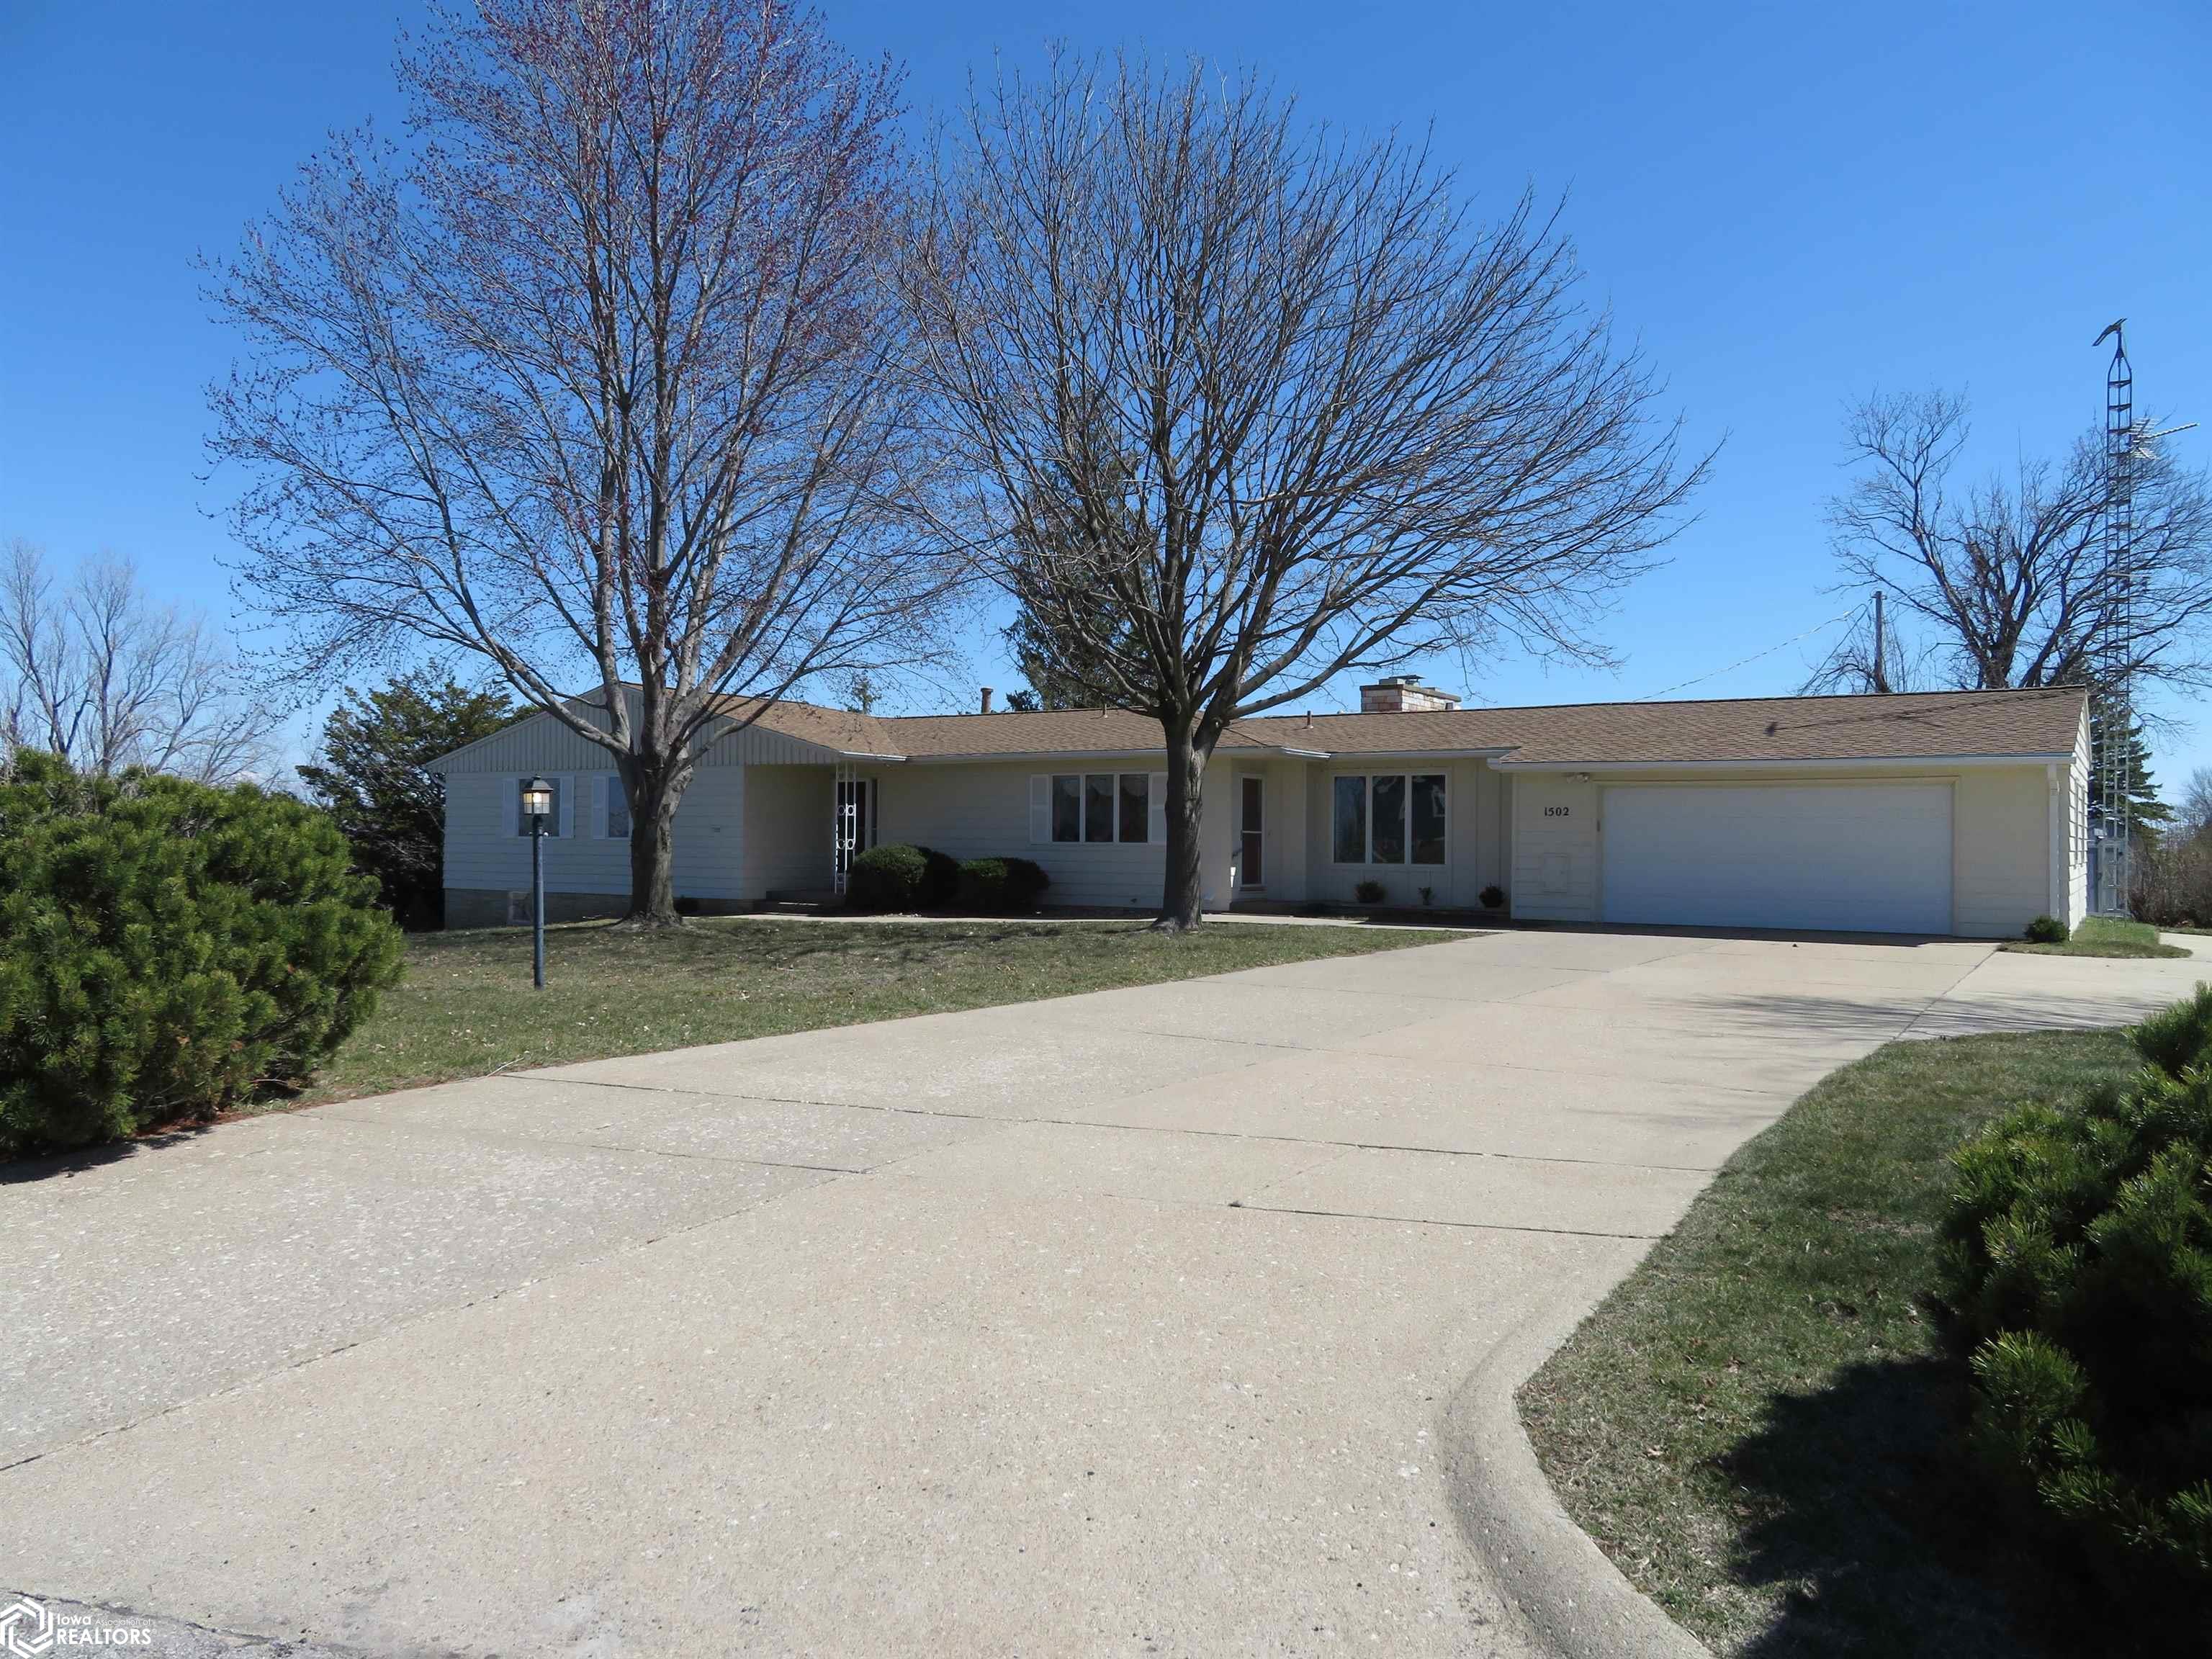 1502 Brentwood, Marshalltown, Iowa 50158, 4 Bedrooms Bedrooms, ,1 BathroomBathrooms,Single Family,For Sale,Brentwood,6315784